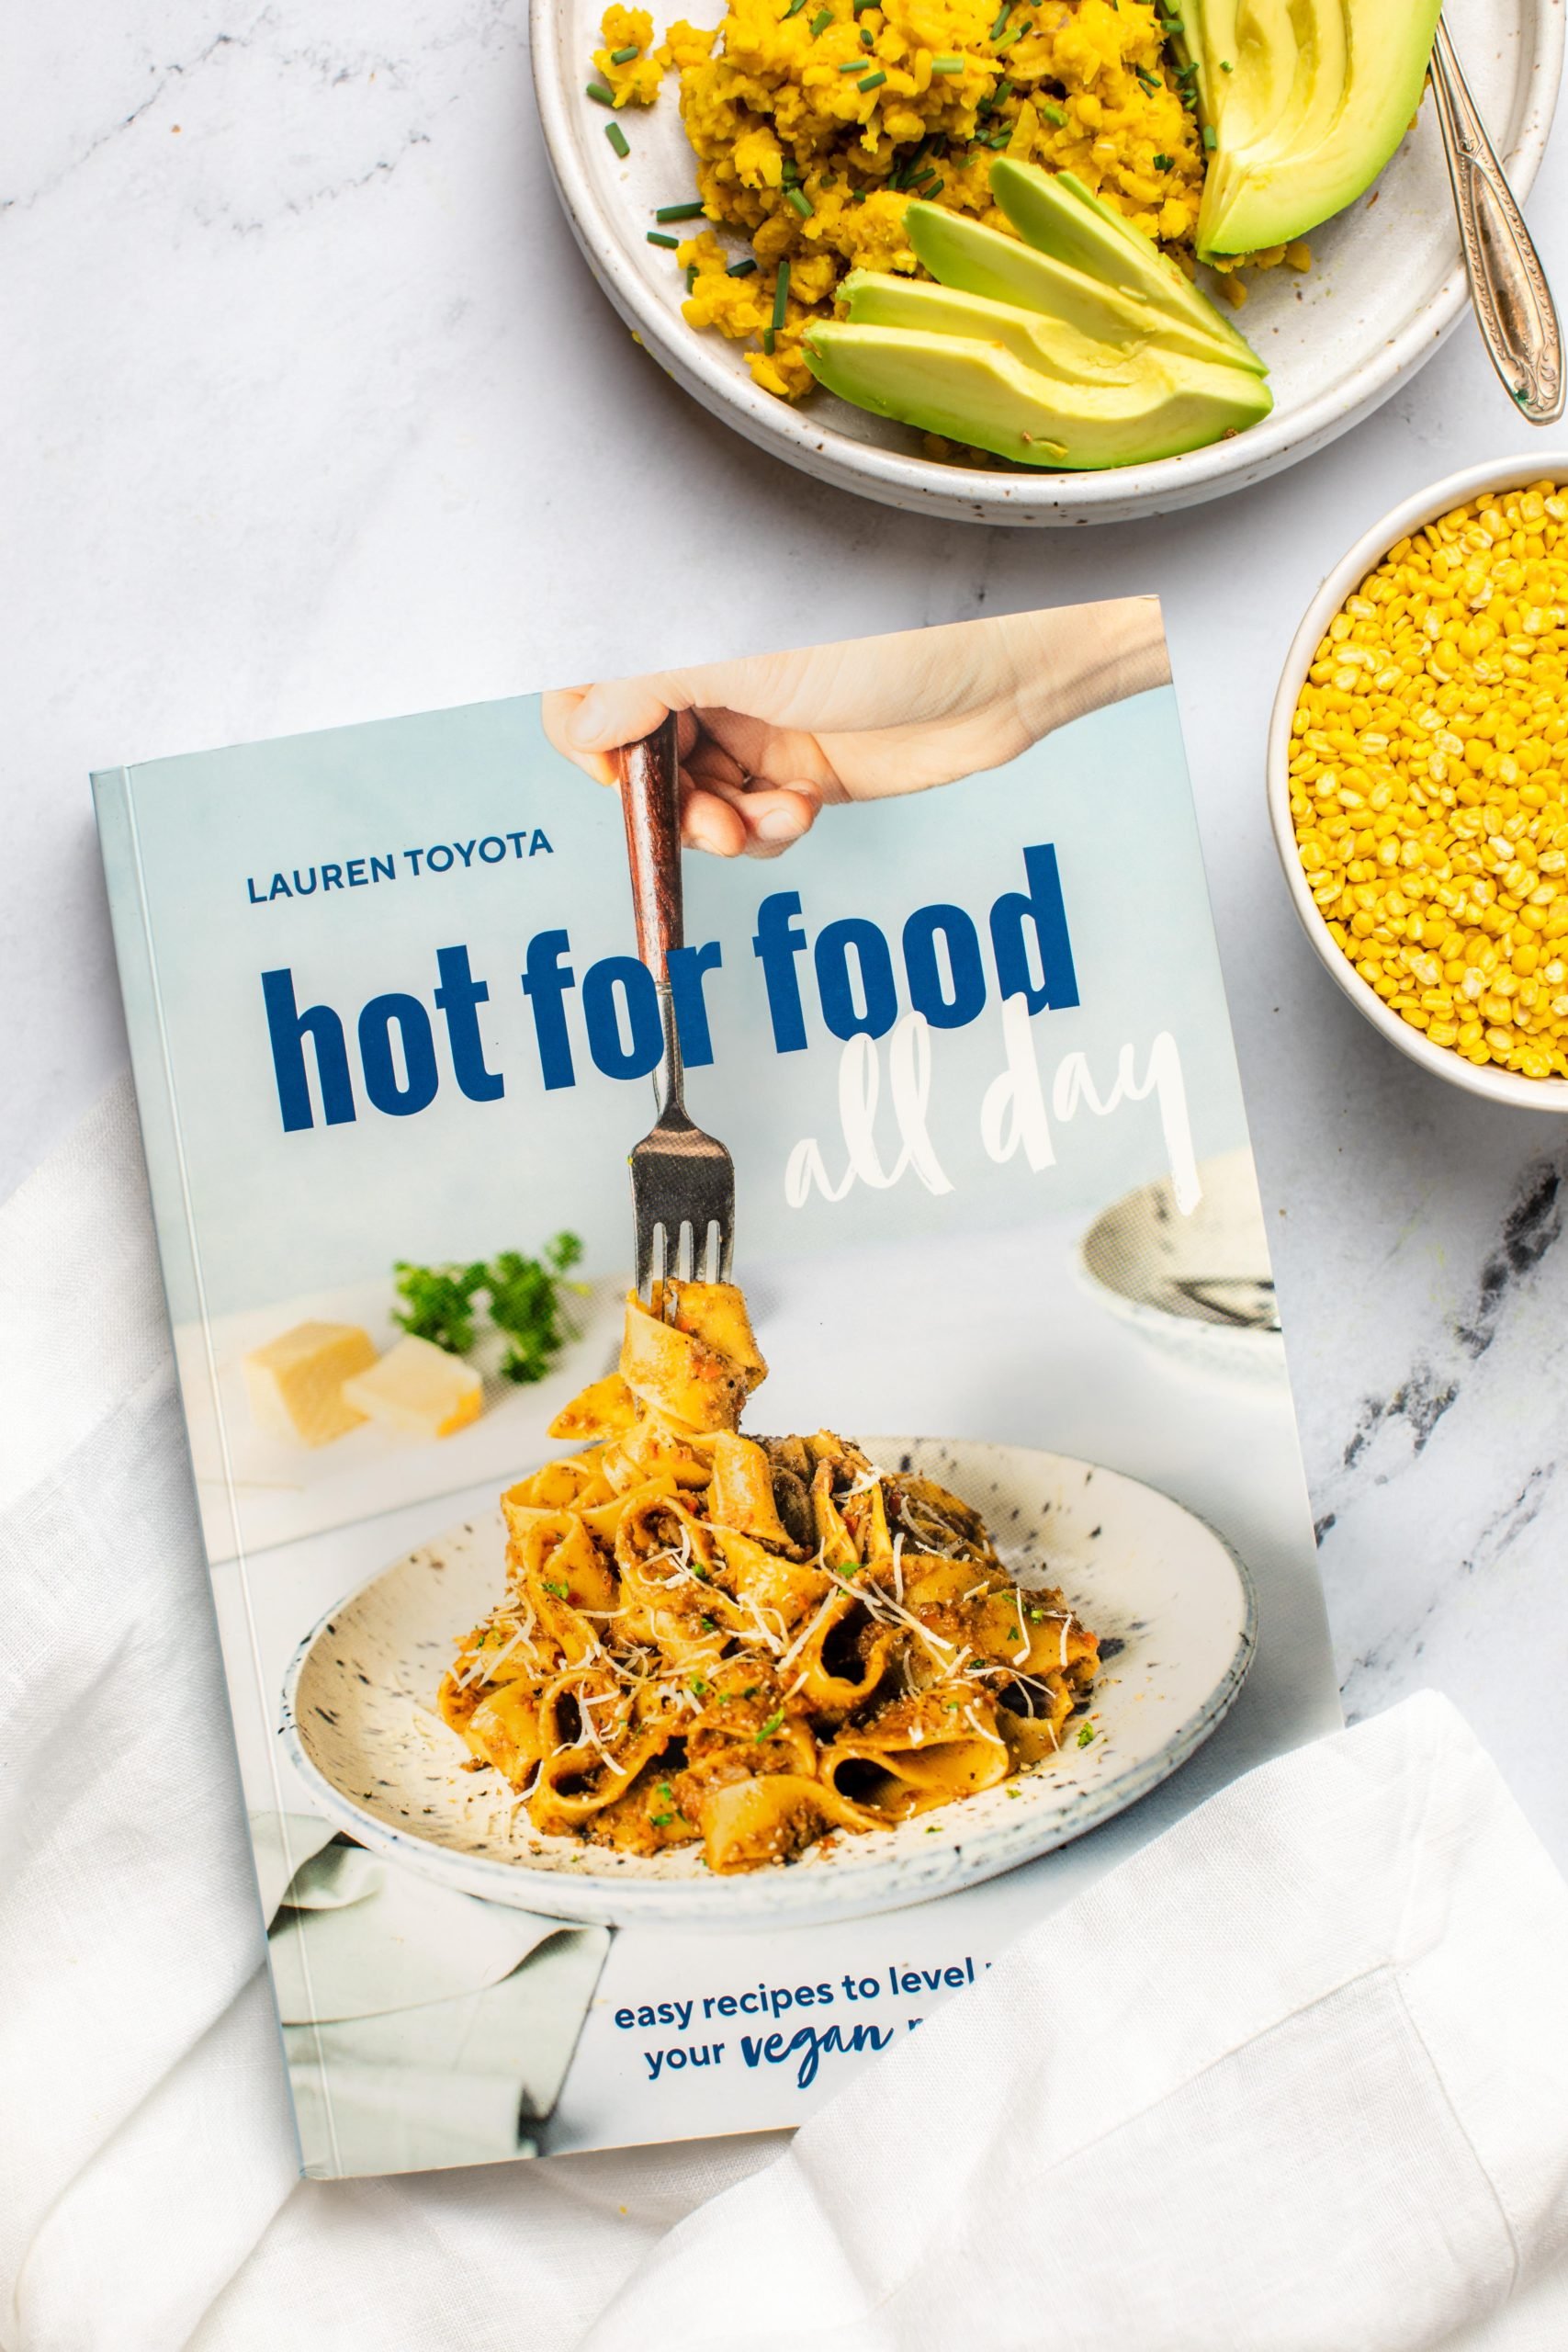 hot for food cookbook on marble background with bowl of split mung beans and cooked mung bean scramble of to the right side